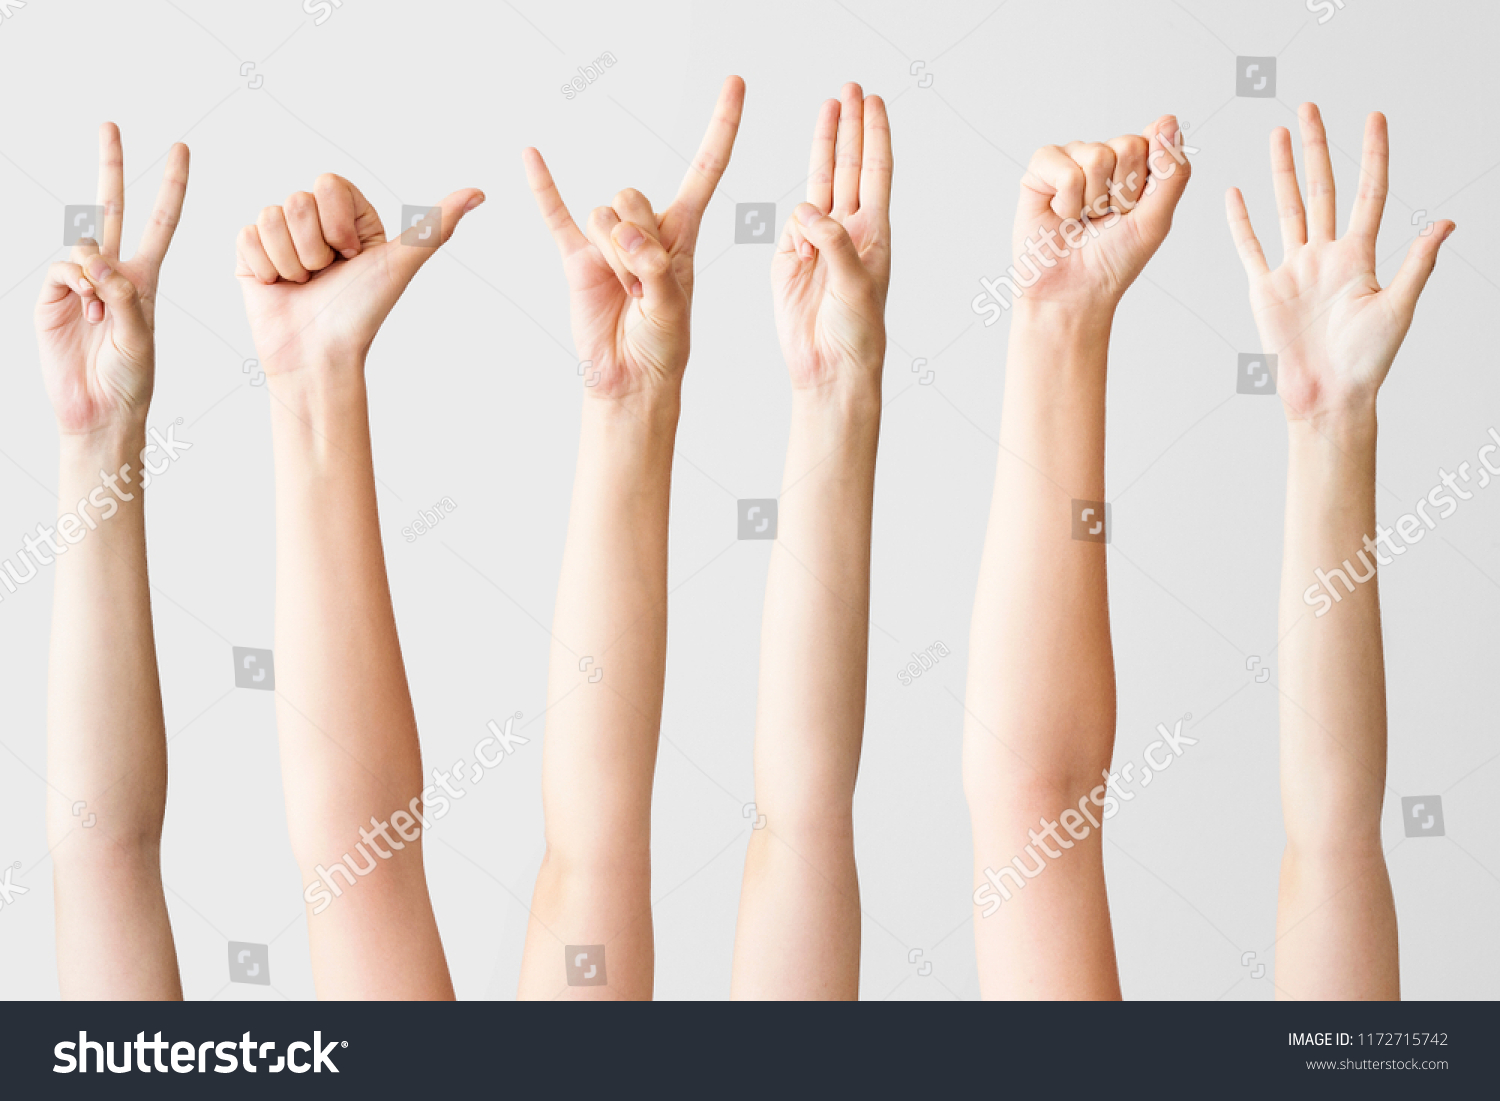 Multiple female hand gestures on gray background #1172715742